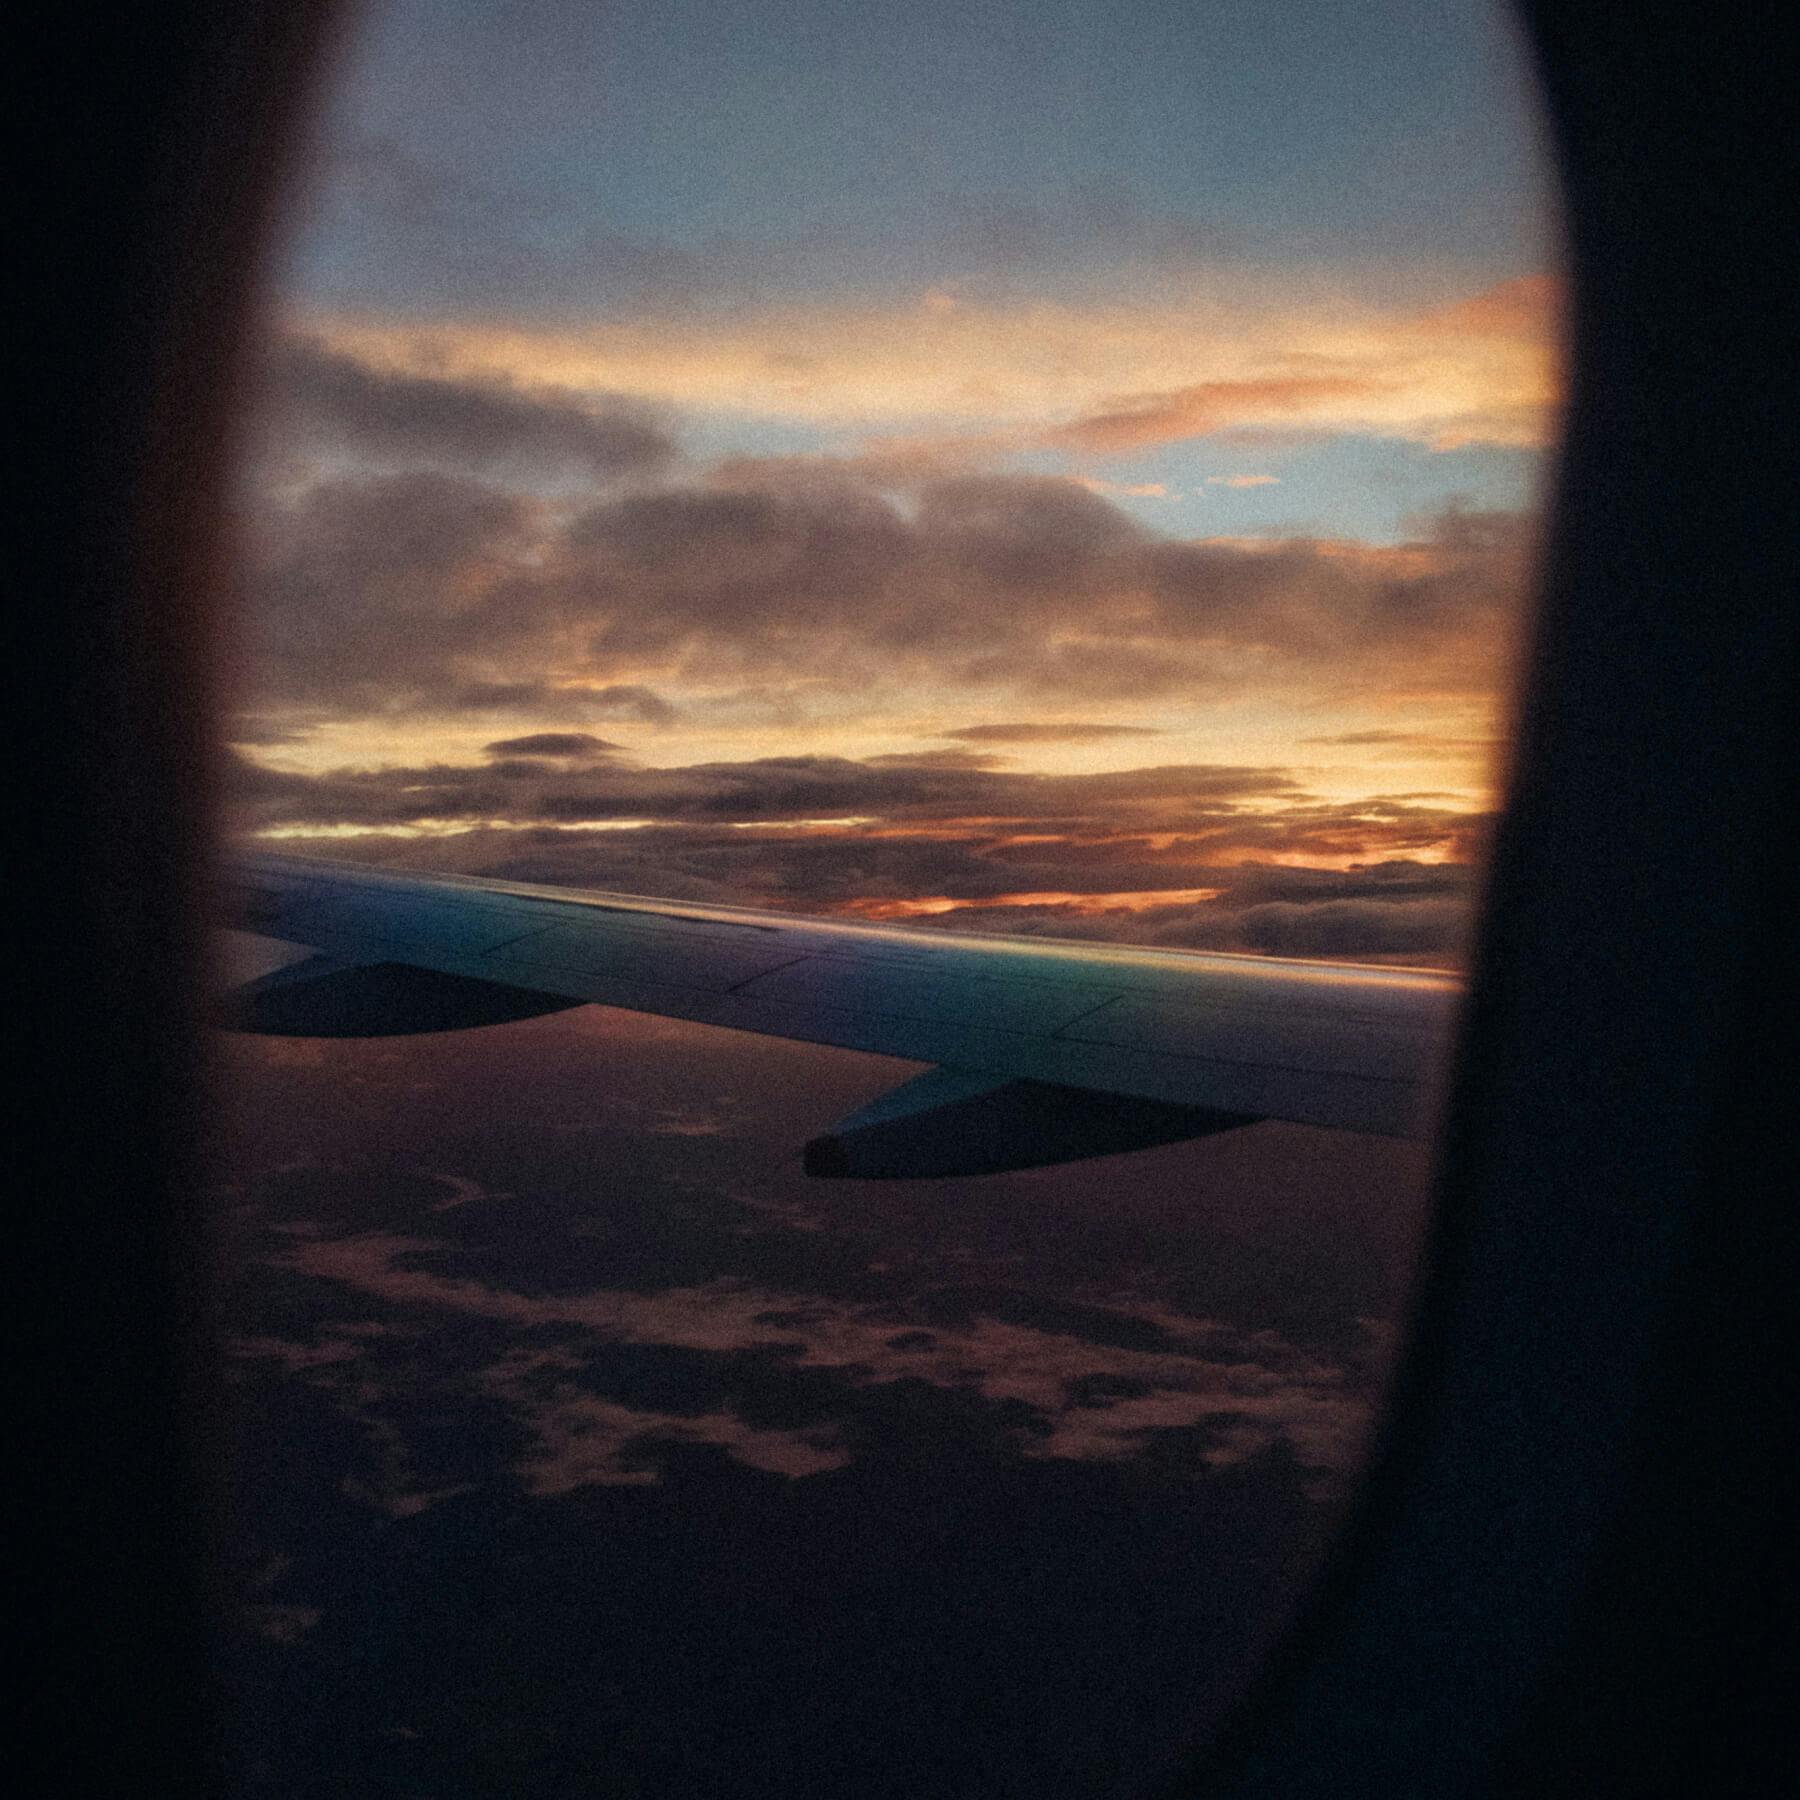 Looking out from the perspective of inside an airplane in flight looking at the plane's wing and the sunset.